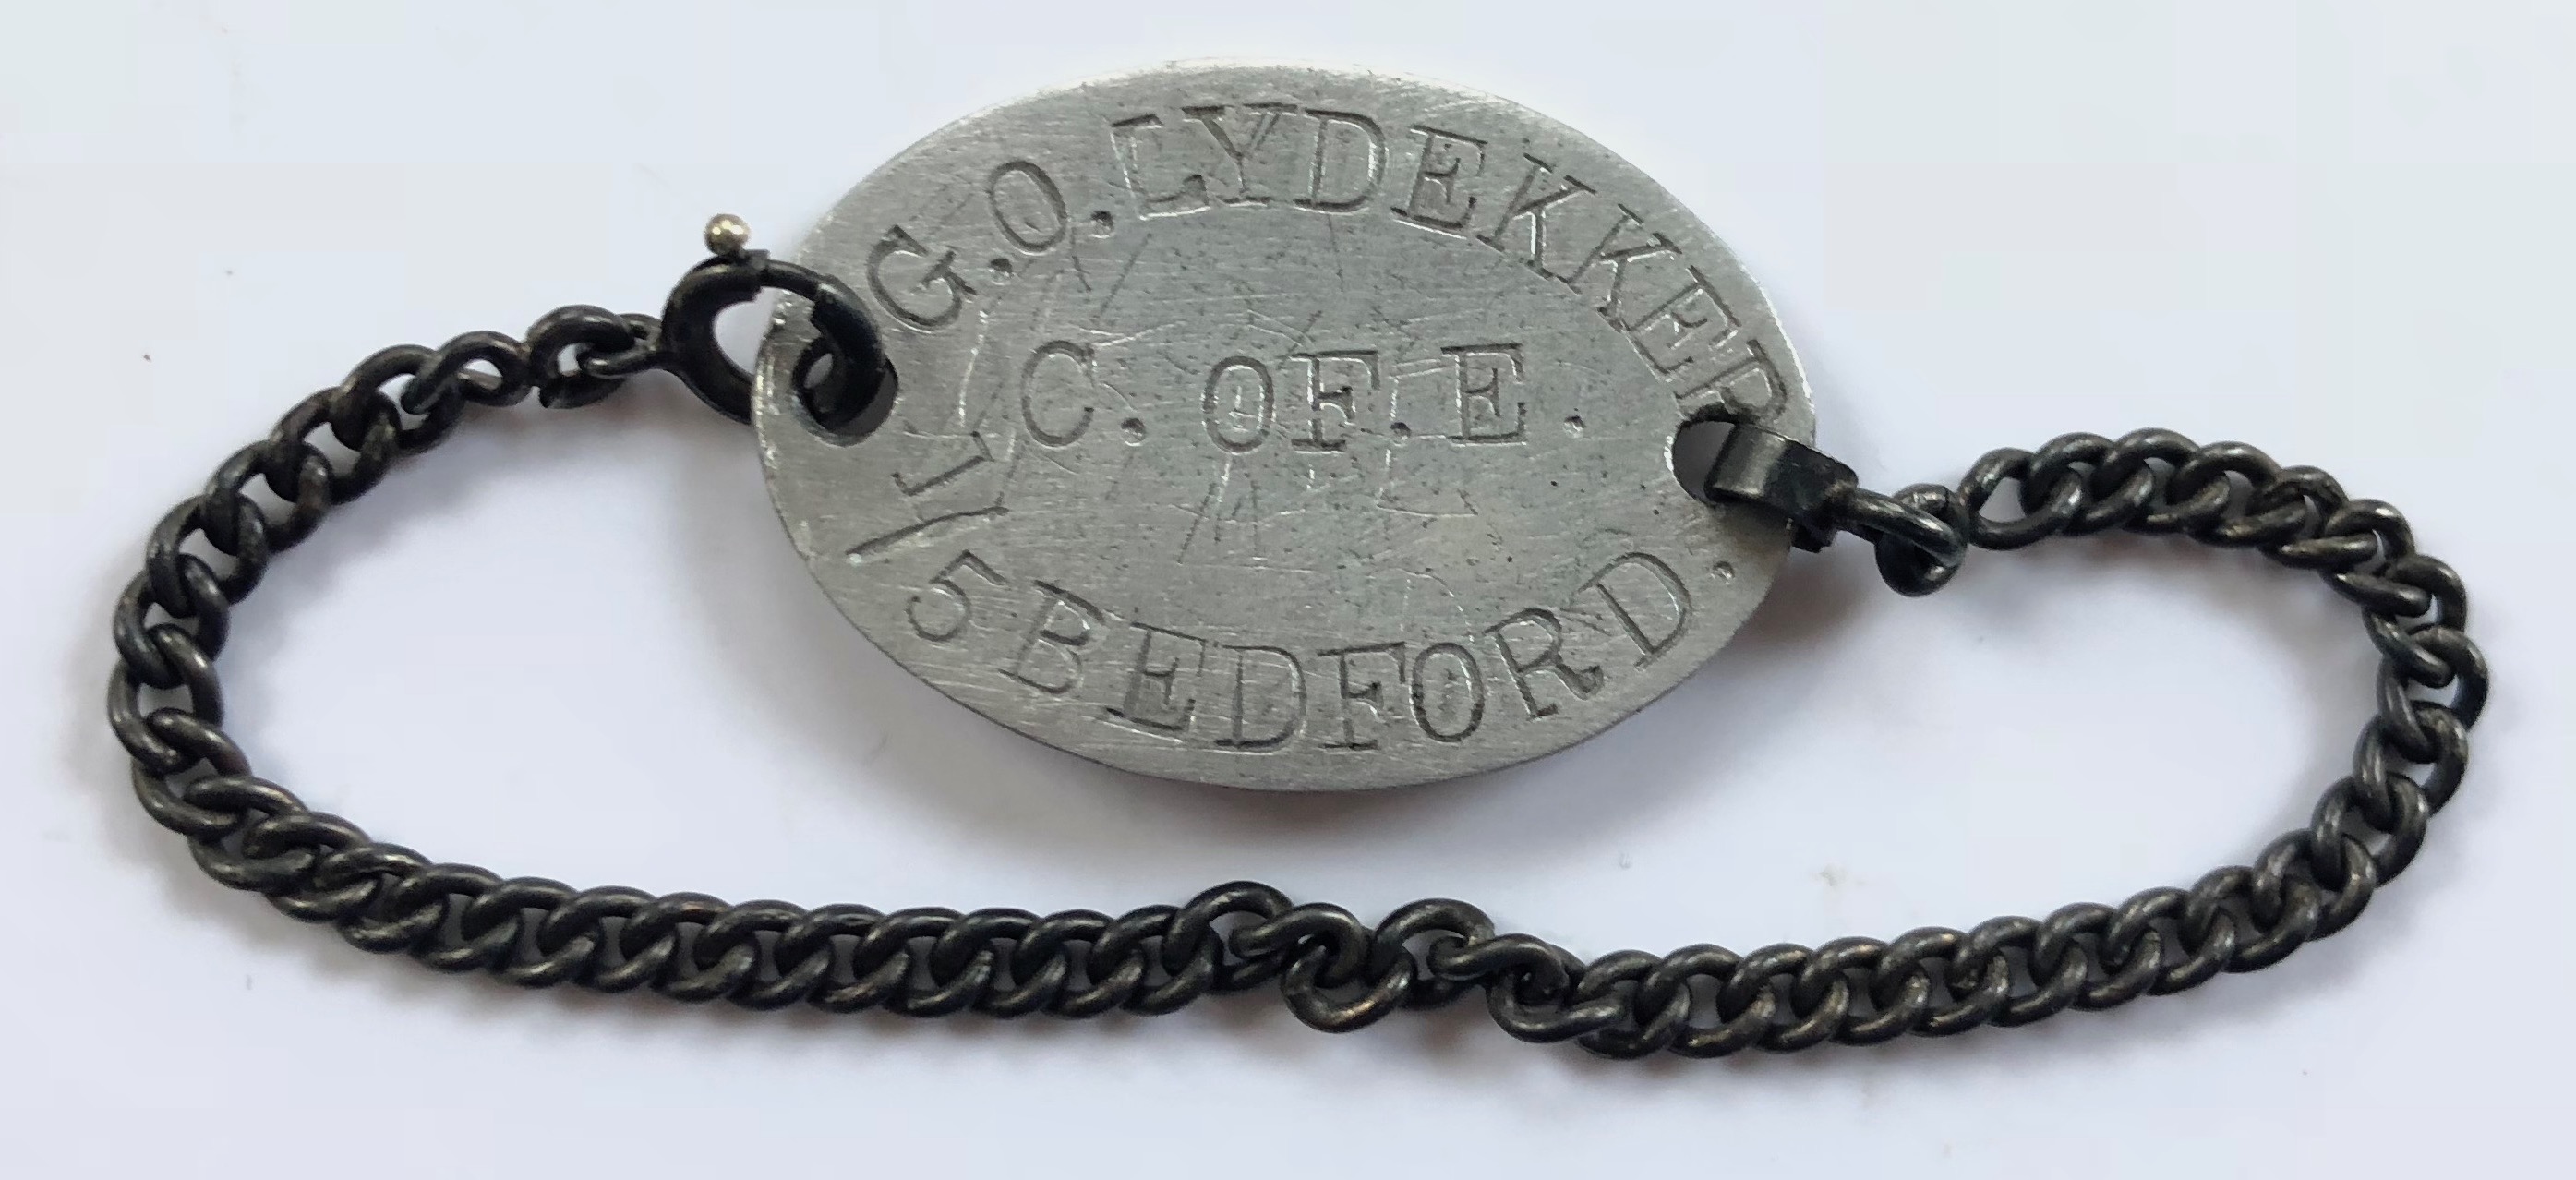 WW1 5th Bn Bedfordshire Regiment Casualty Officer ID bracelet and 1913 London Driving Licence. An - Image 2 of 2